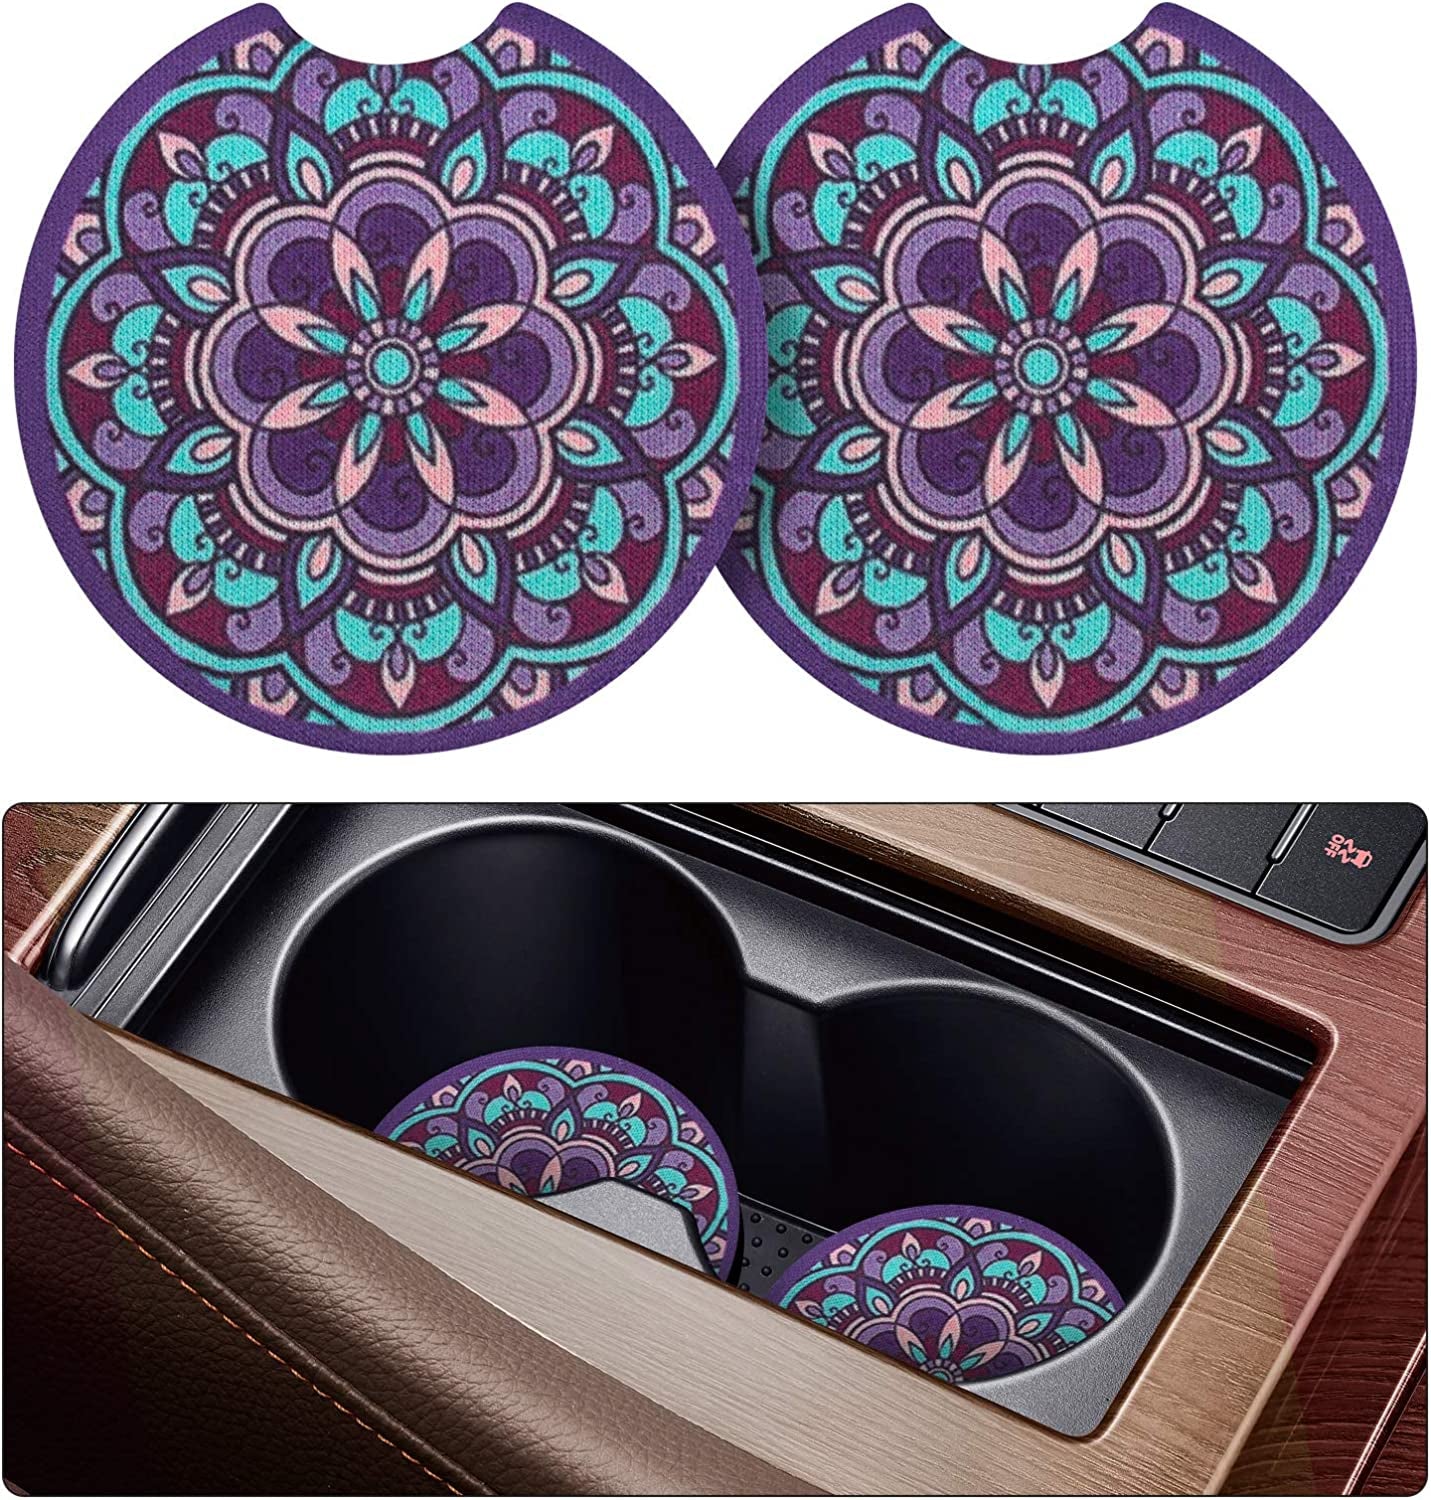  2 Pack Car Coasters for Cup Holders